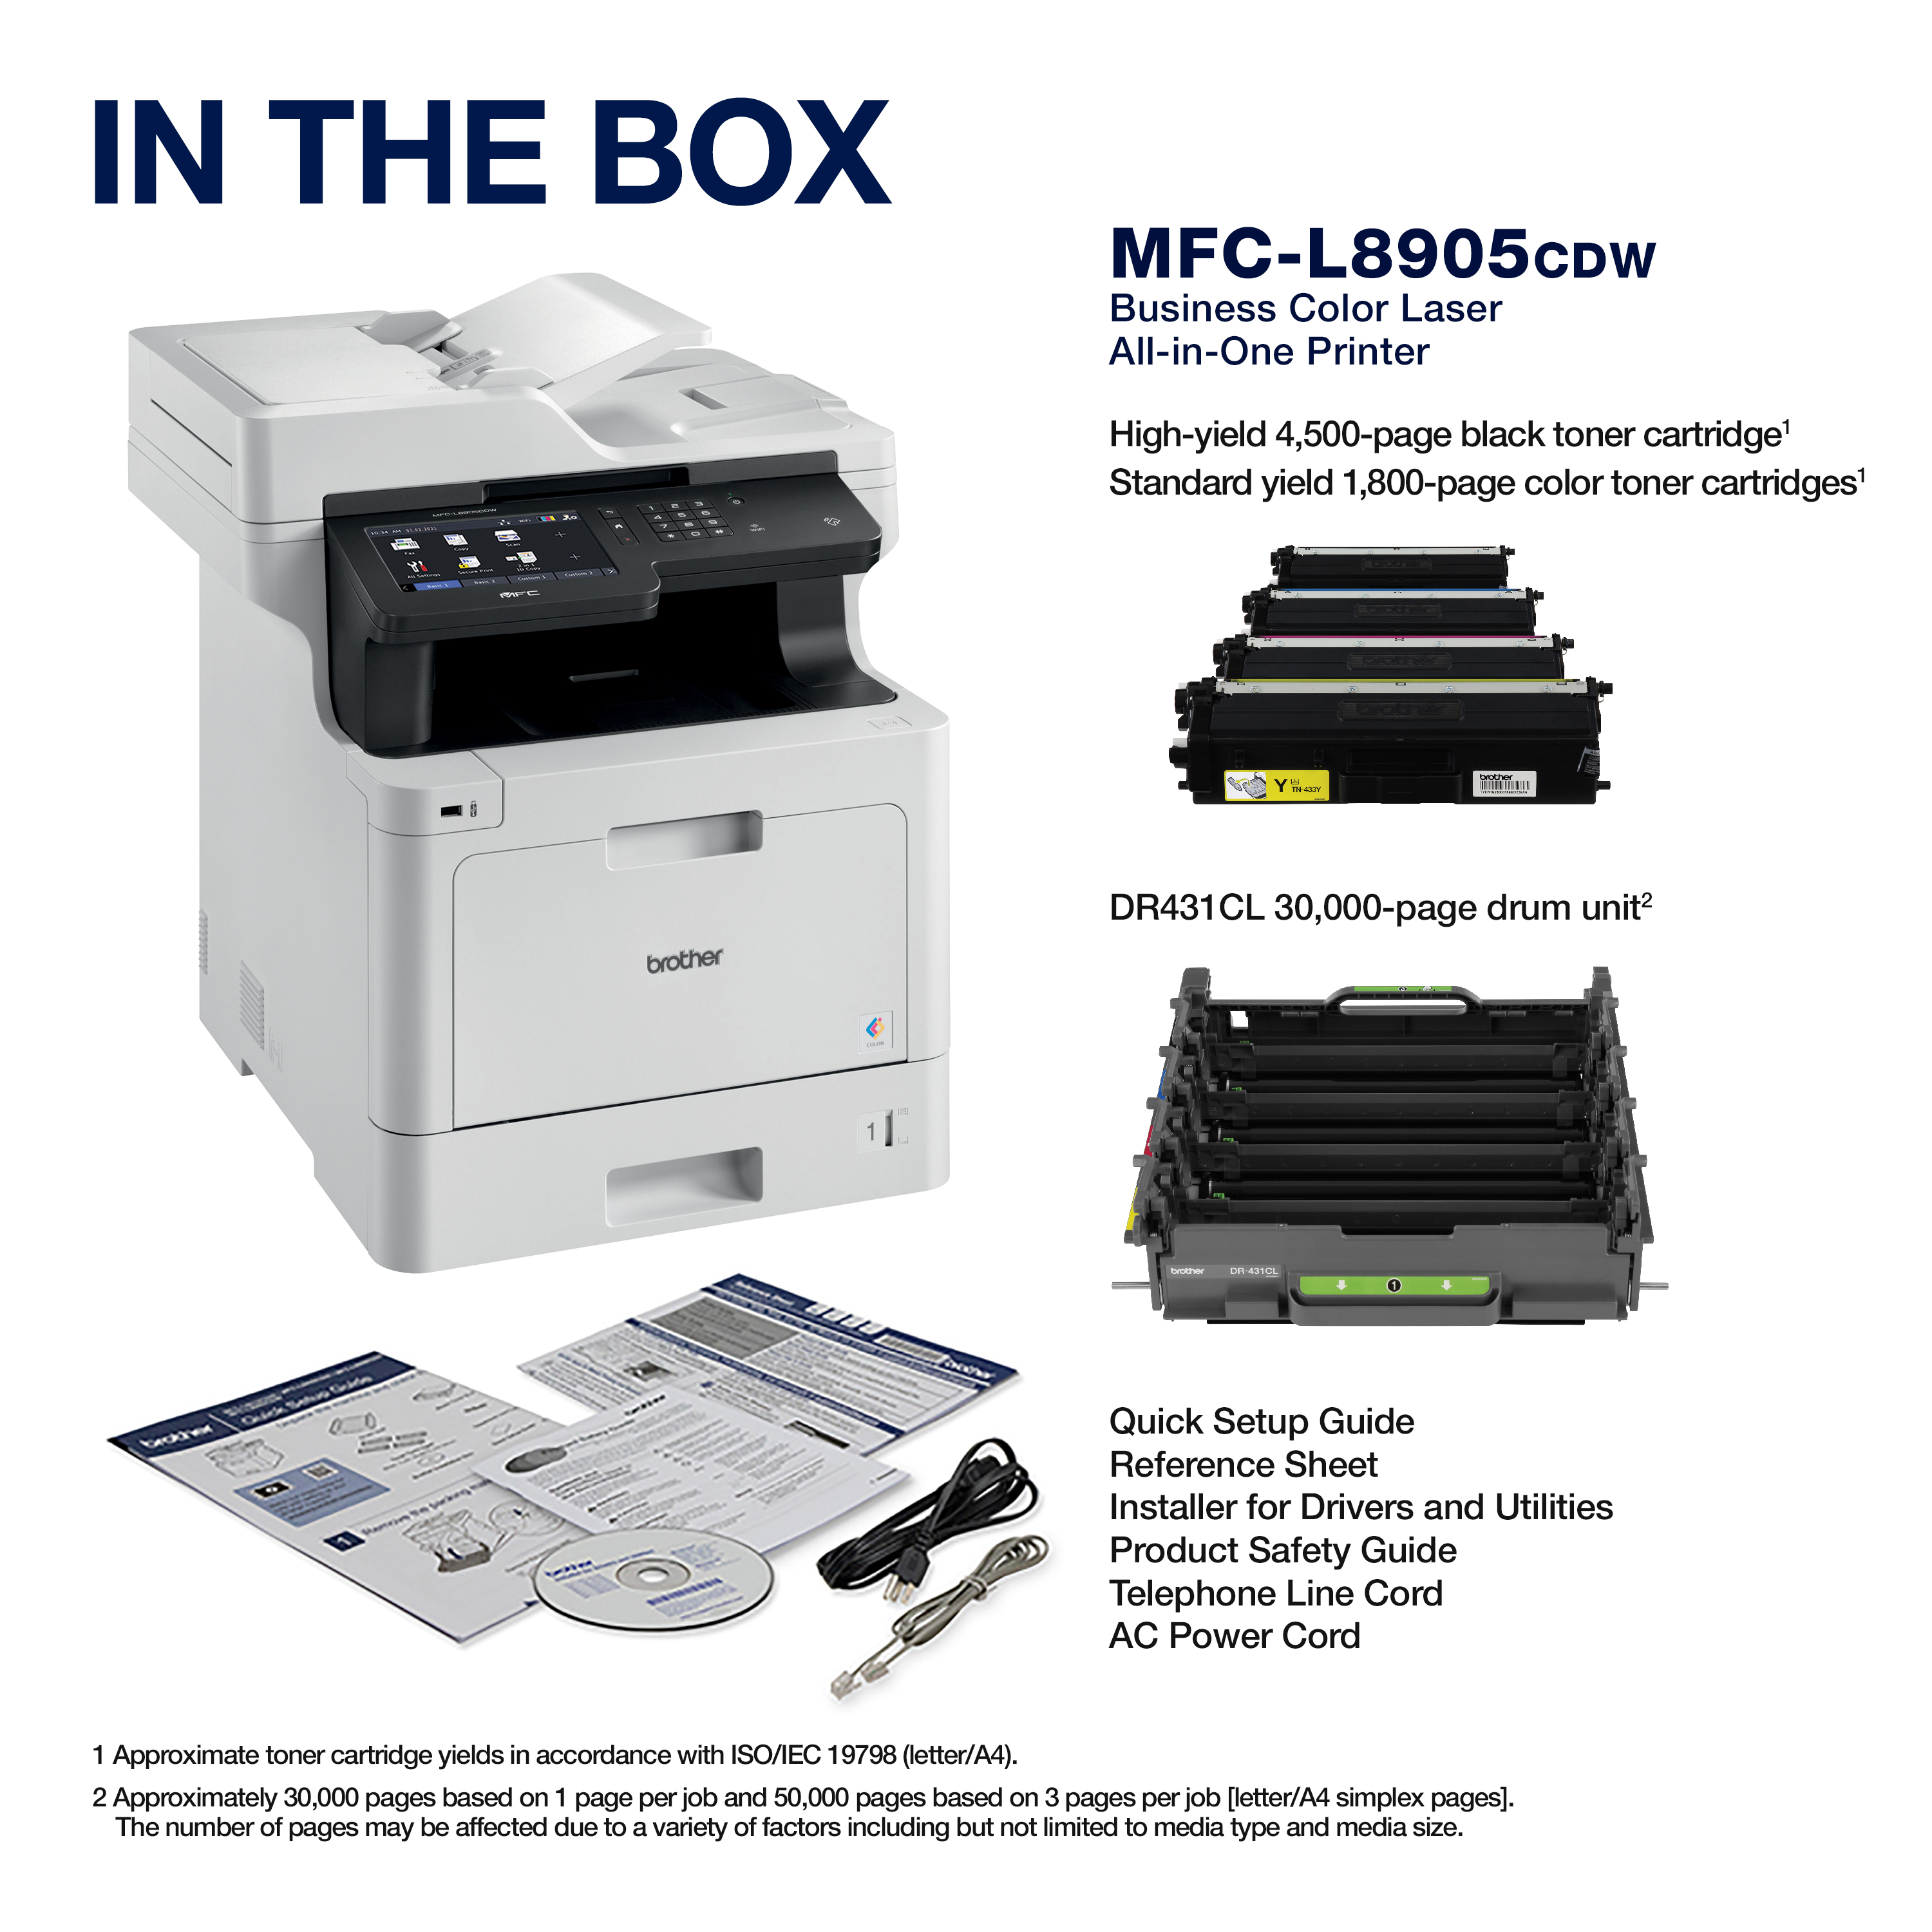 Business Color Laser All-in-One Printer with Low-cost Printing, Duplex  Print, Scan, Copy and Wireless Networking